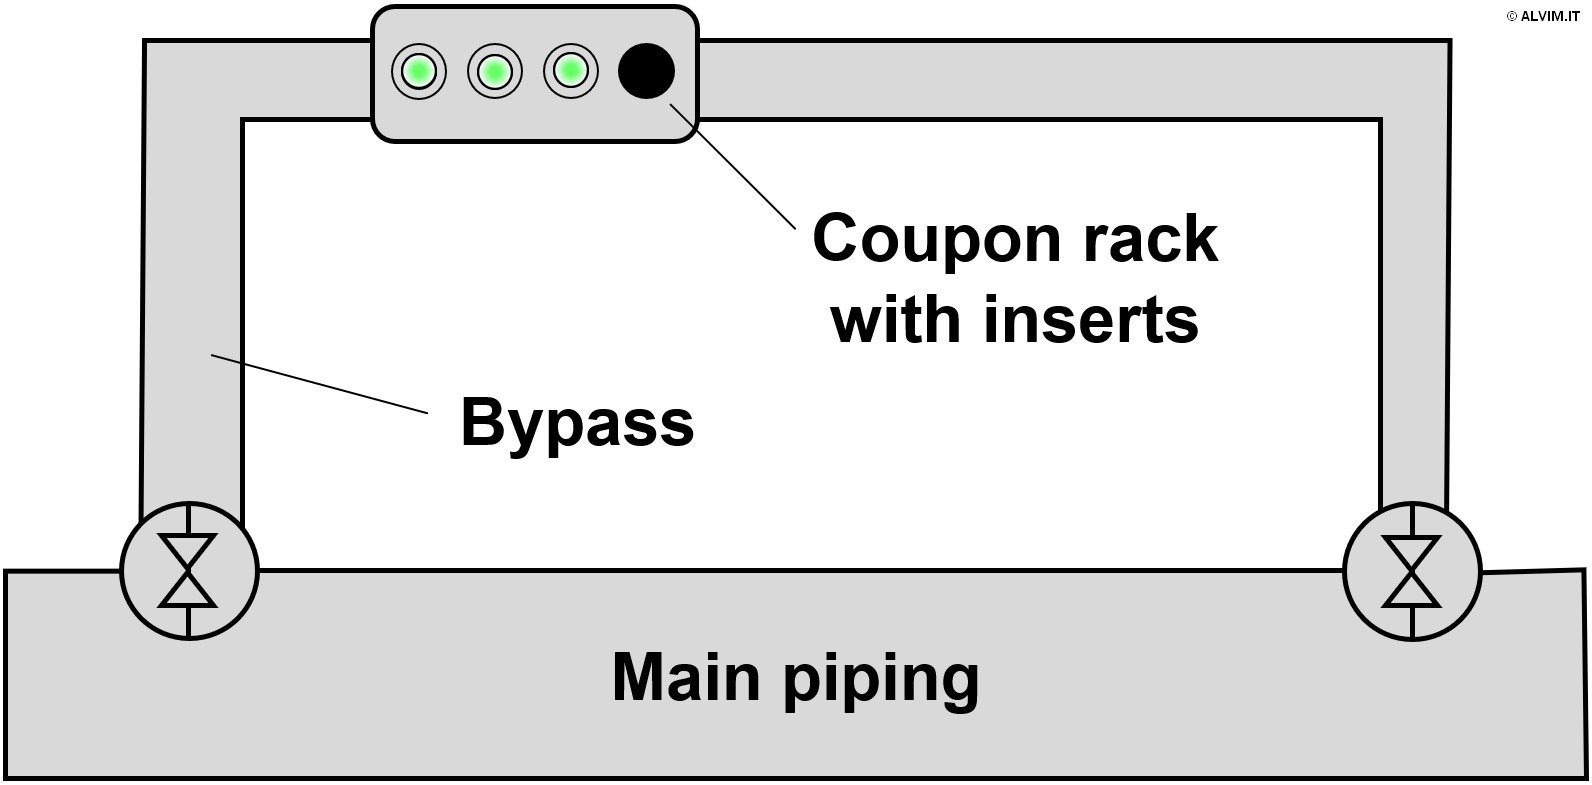 Coupon rack installed in a system bypass